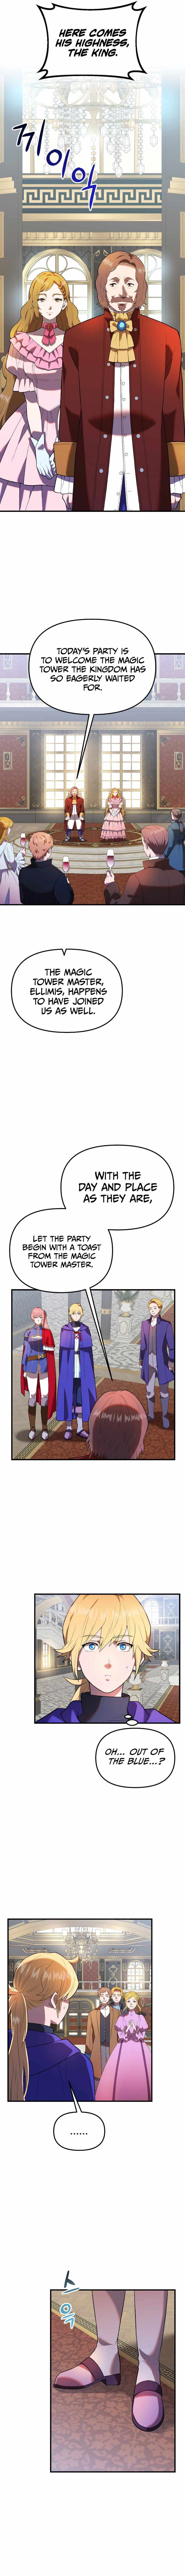 Golden Mage Chapter 32